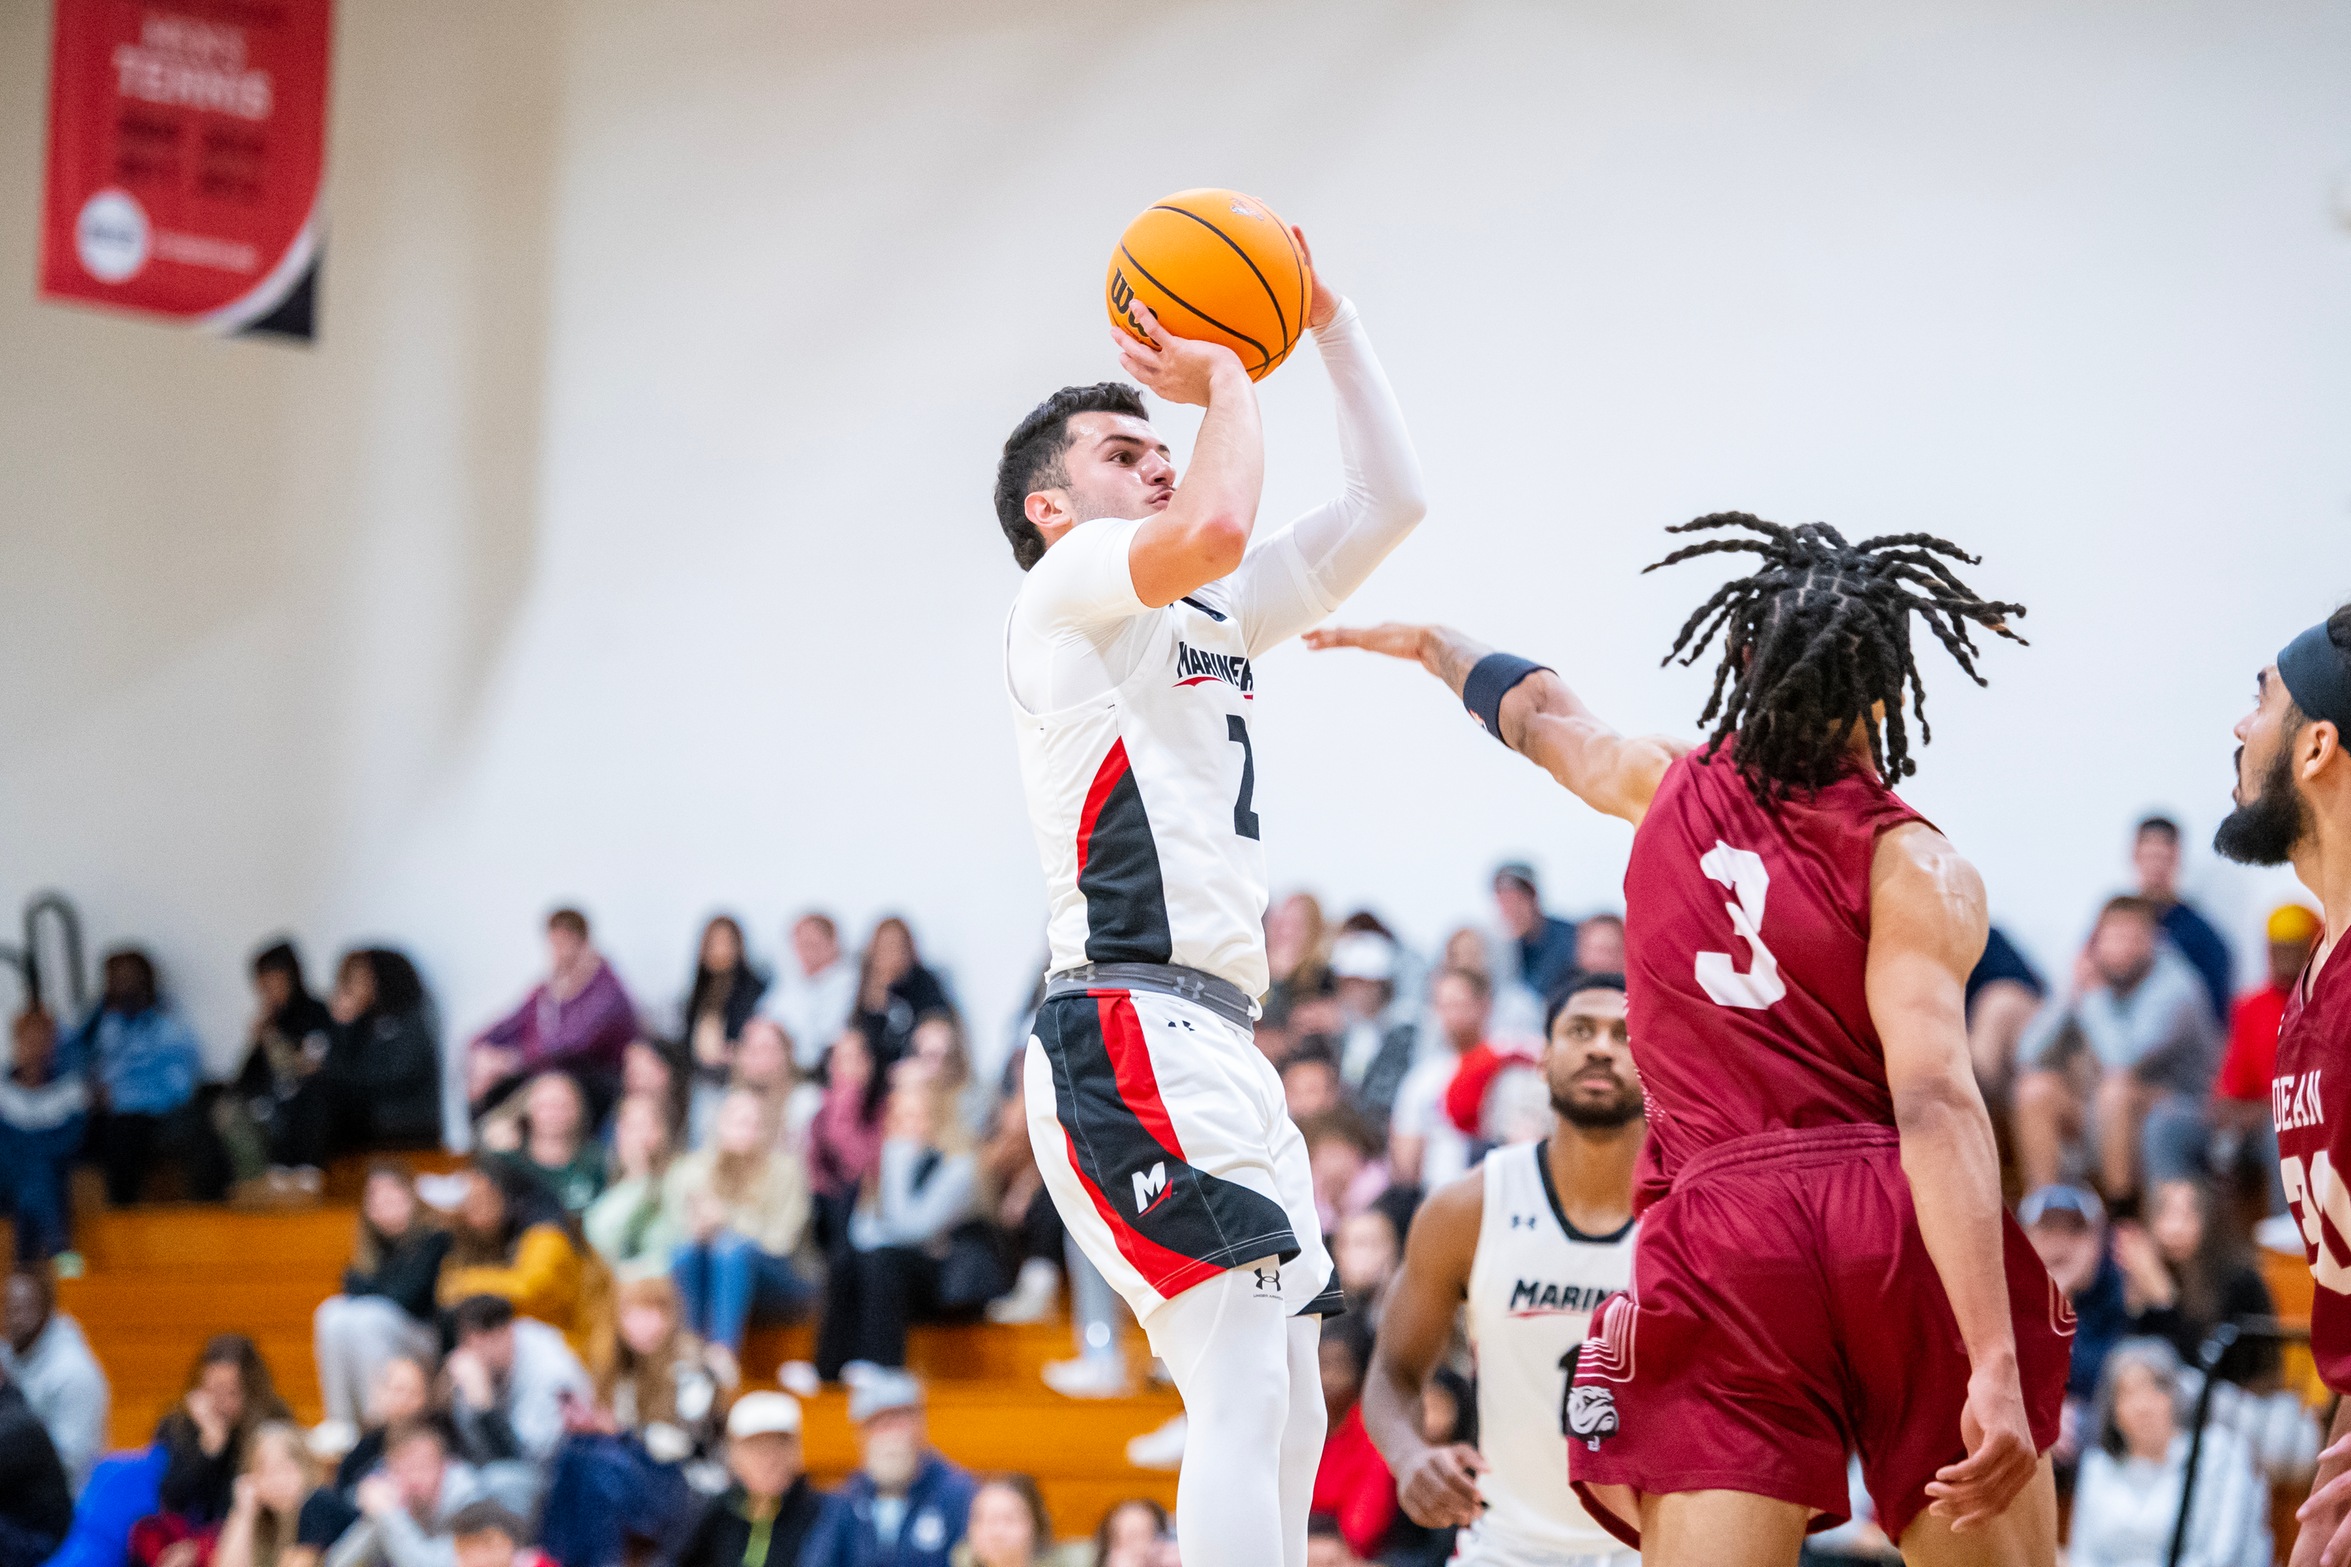 MBB Topples Trinity to Remain Undefeated at Home